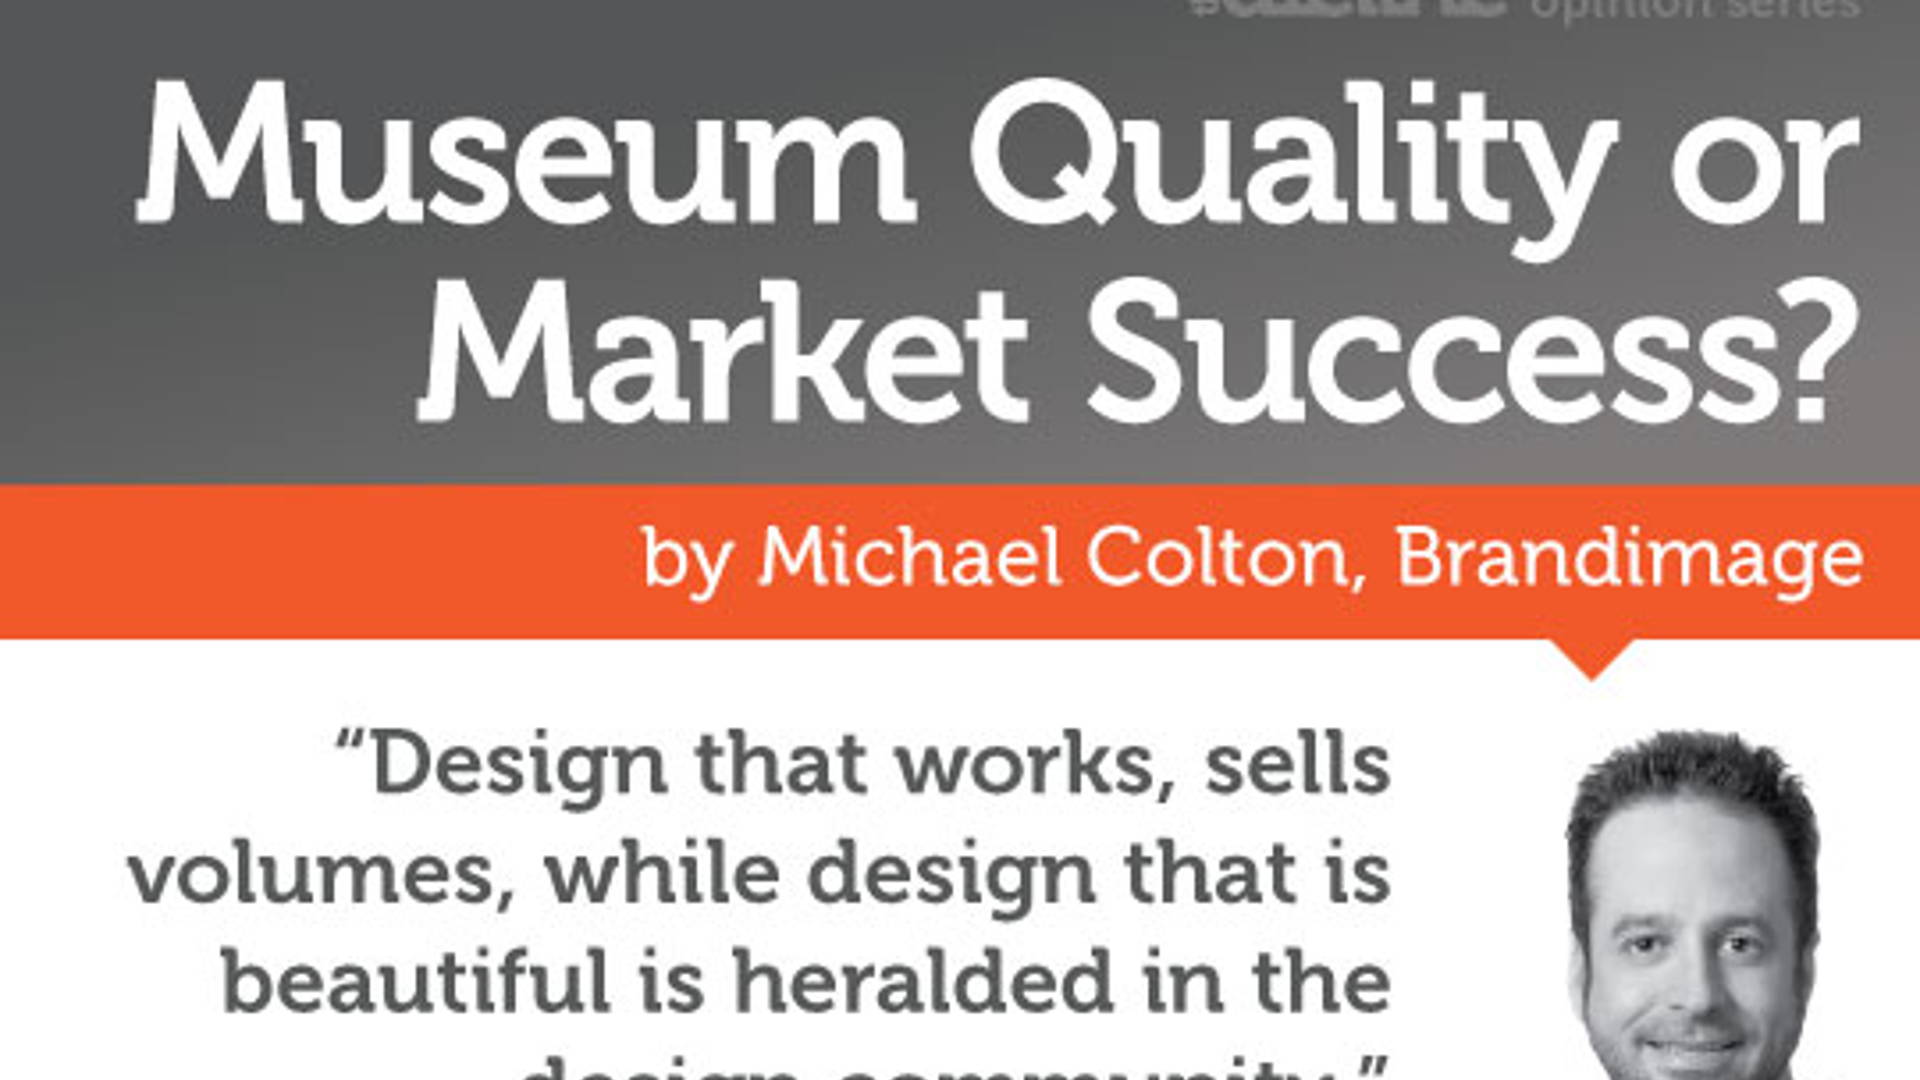 Featured image for Museum Quality or Market Success?